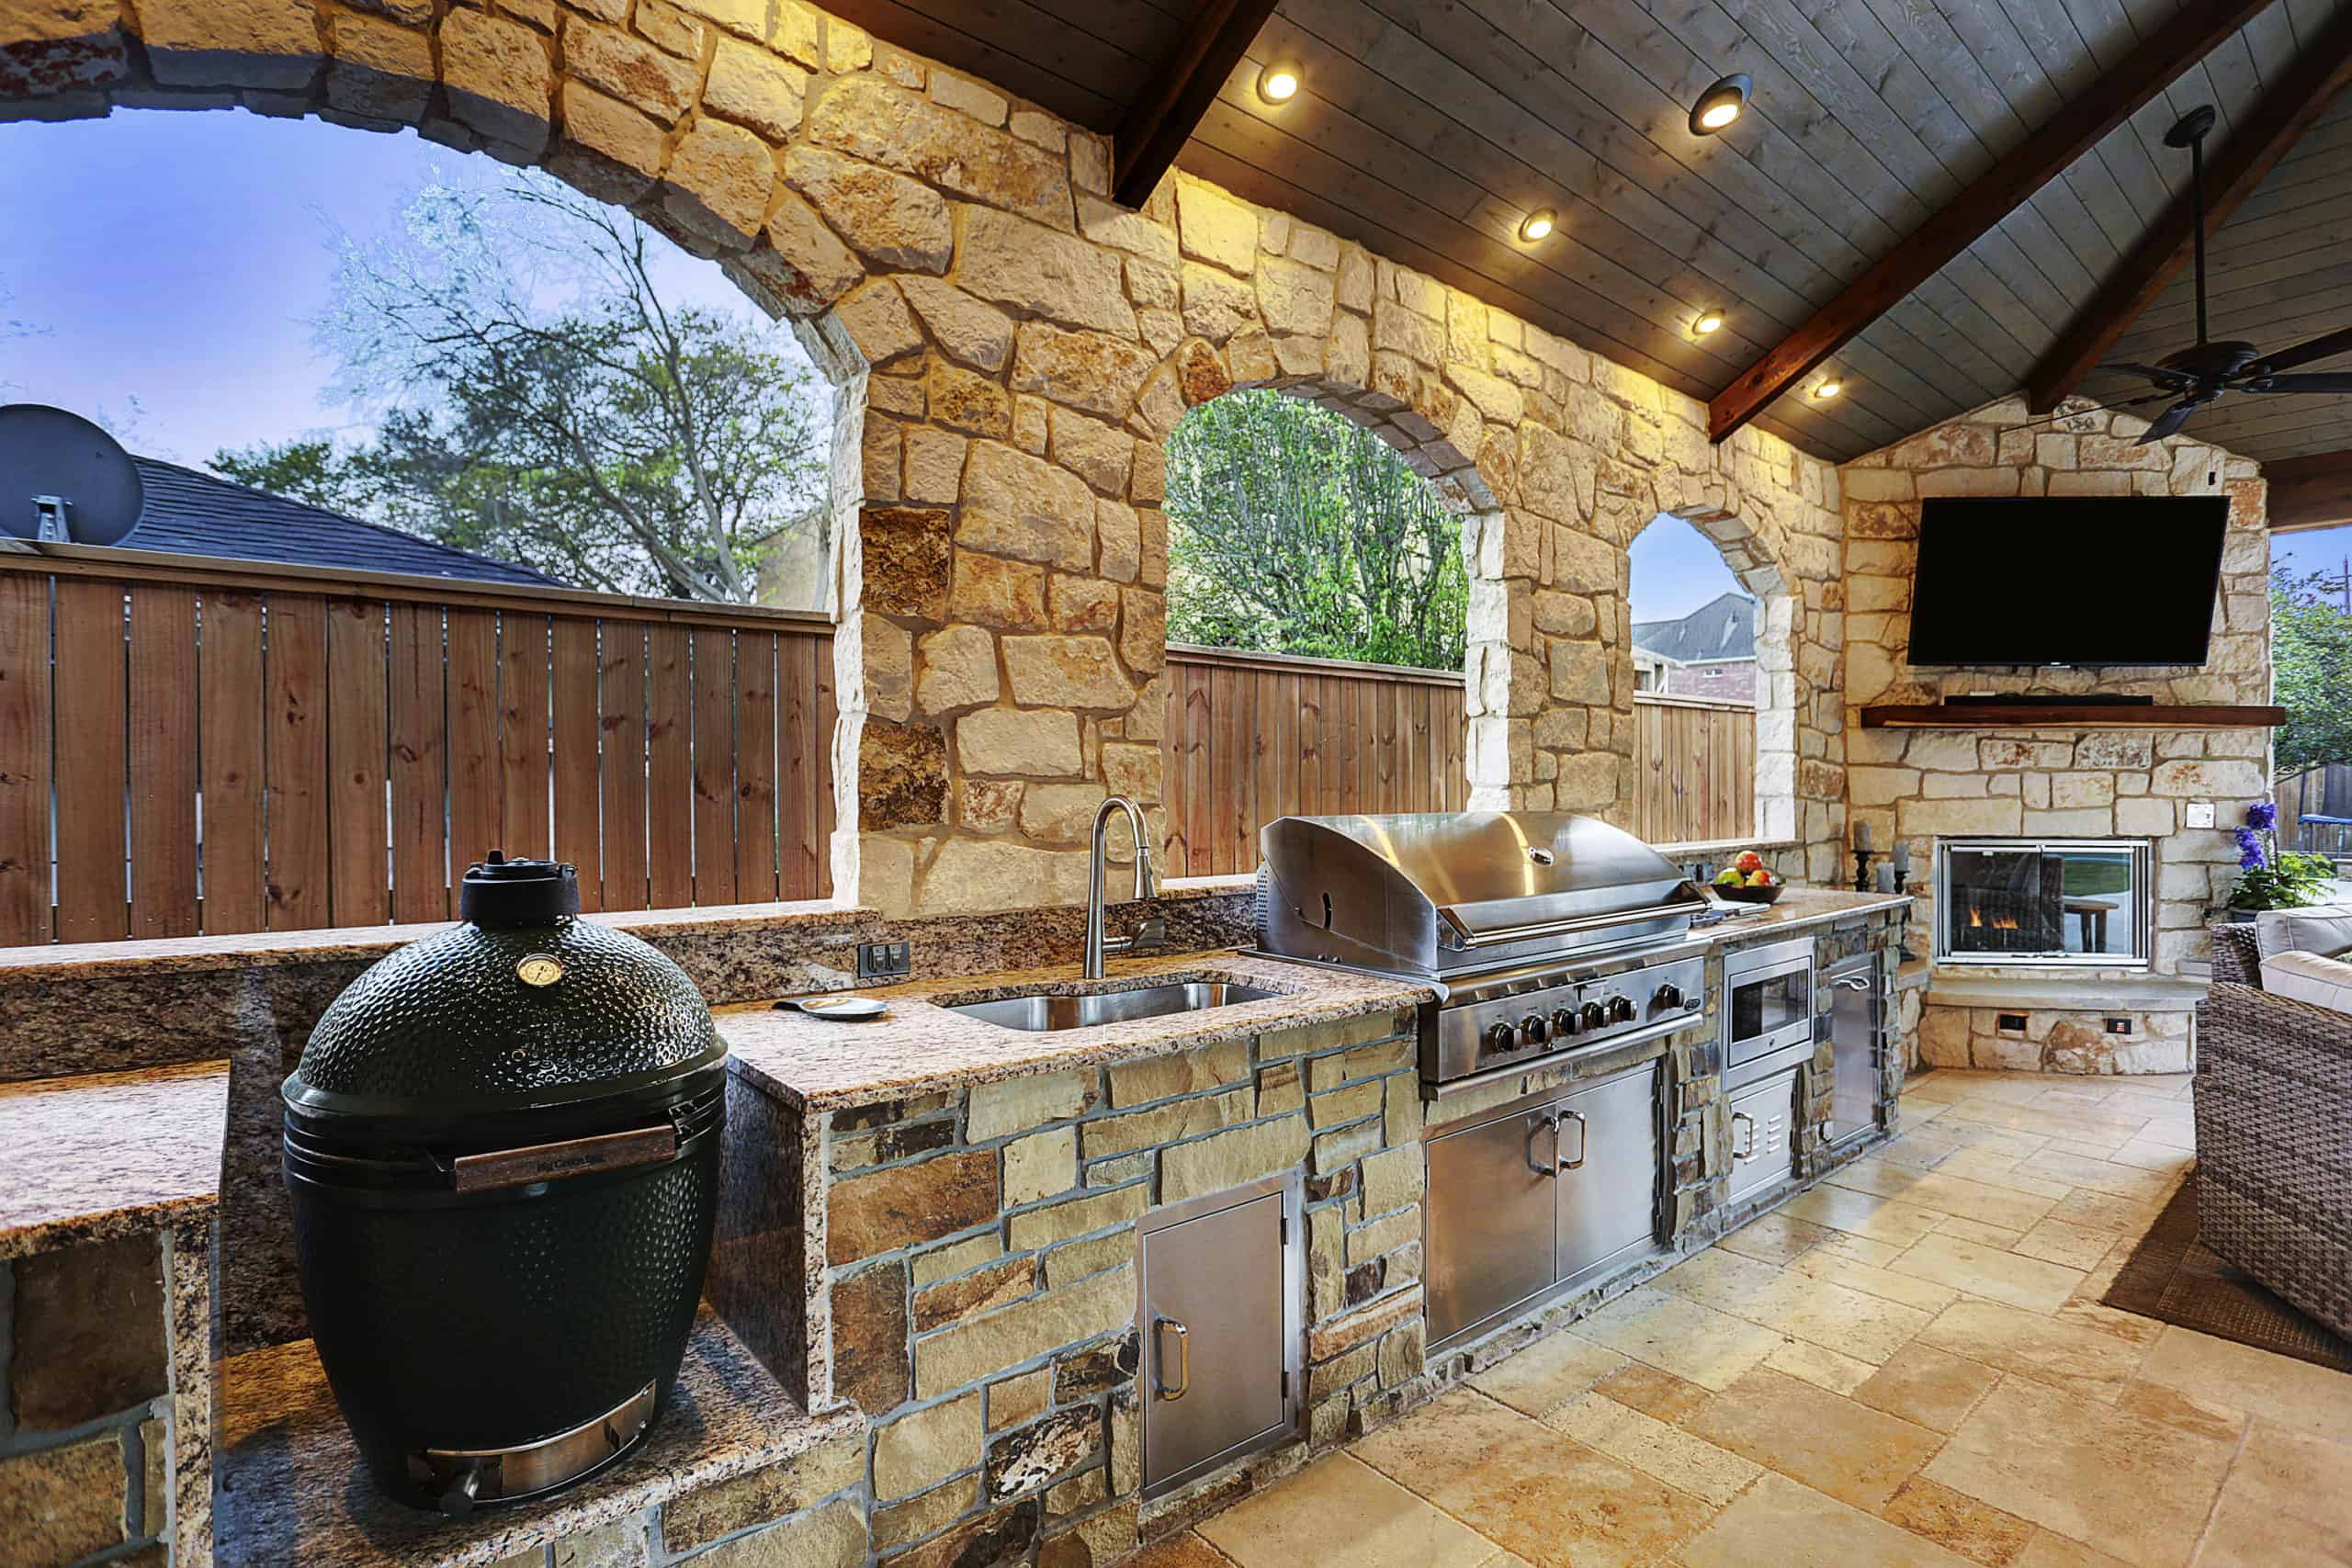 The best appliances for your outdoor kitchen - Texas Custom Patios